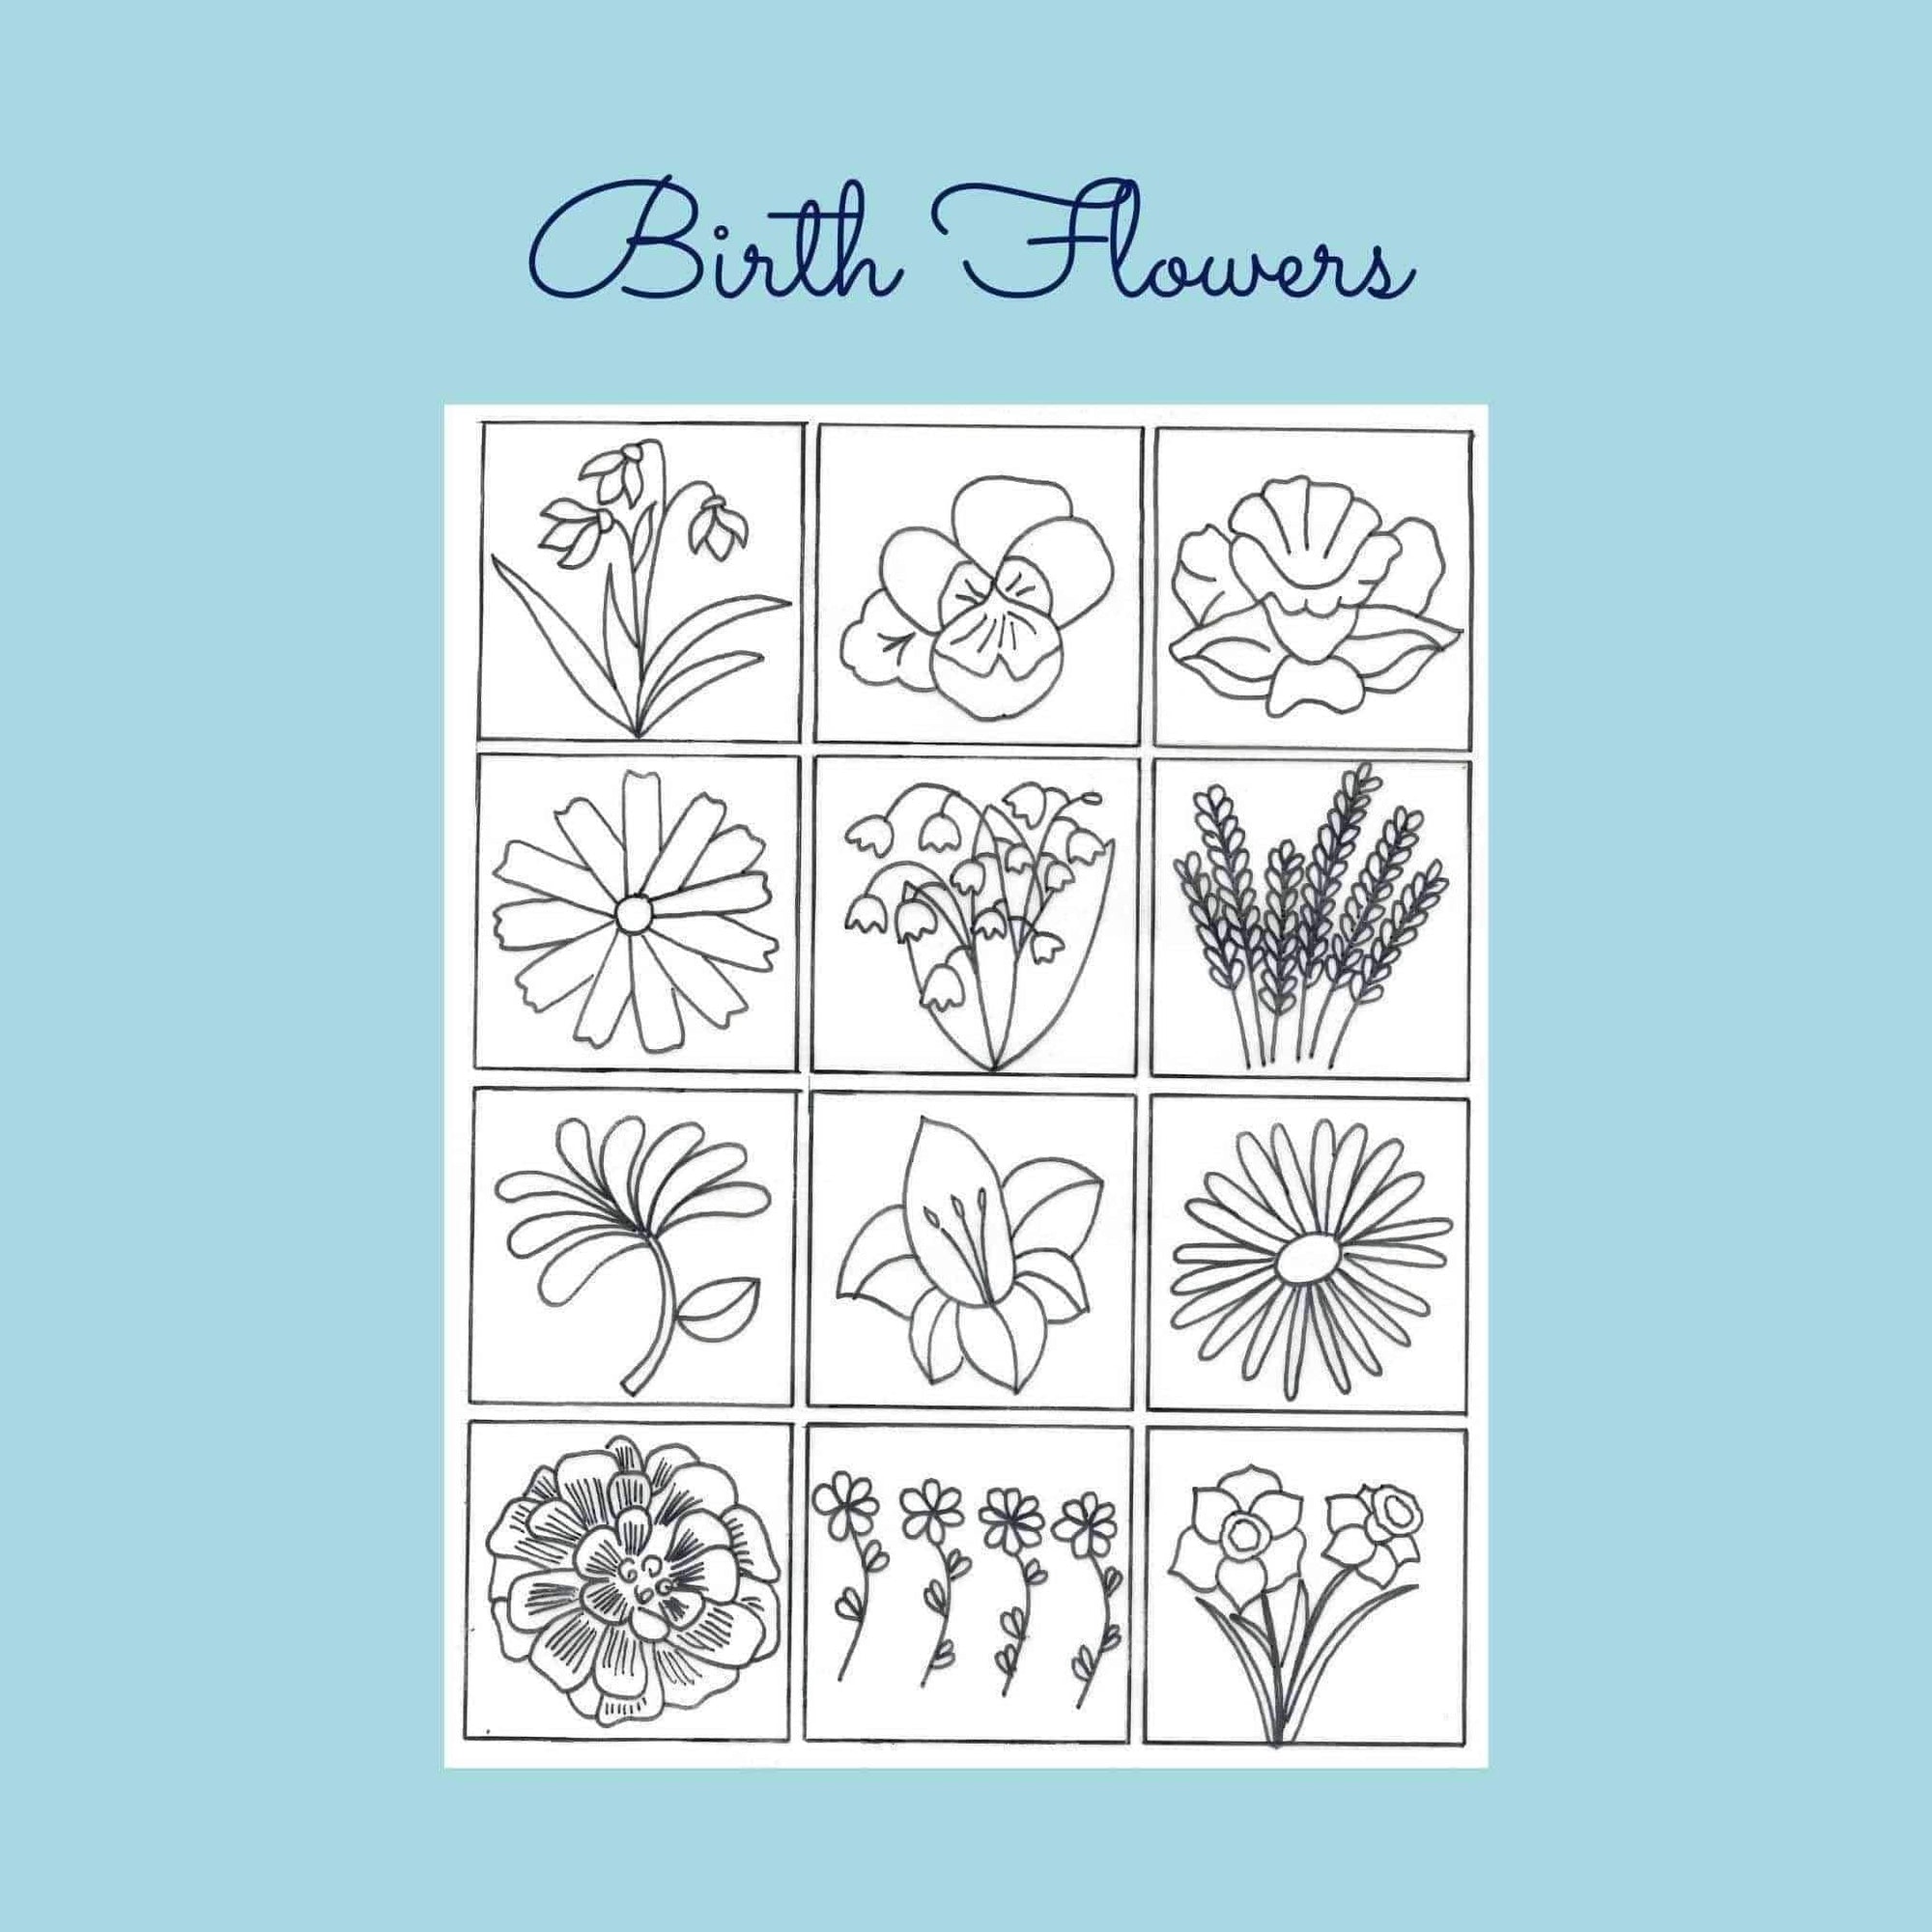 Birth Flowers Hand Embroidery Template , PDF Download , StitchDoodles , bird embroidery, Embroidery, embroidery hoop, embroidery hoop kit, Embroidery Kit, embroidery kit for adults, embroidery kit fro beginners, embroidery pattern, hand embroidery, hand embroidery fabric, hand embroidery seat frame, modern embroidery kits, nurge embroidery hoop, PDF pattern, Printed Pattern, wildlife embroidery , StitchDoodles , shop.stitchdoodles.com